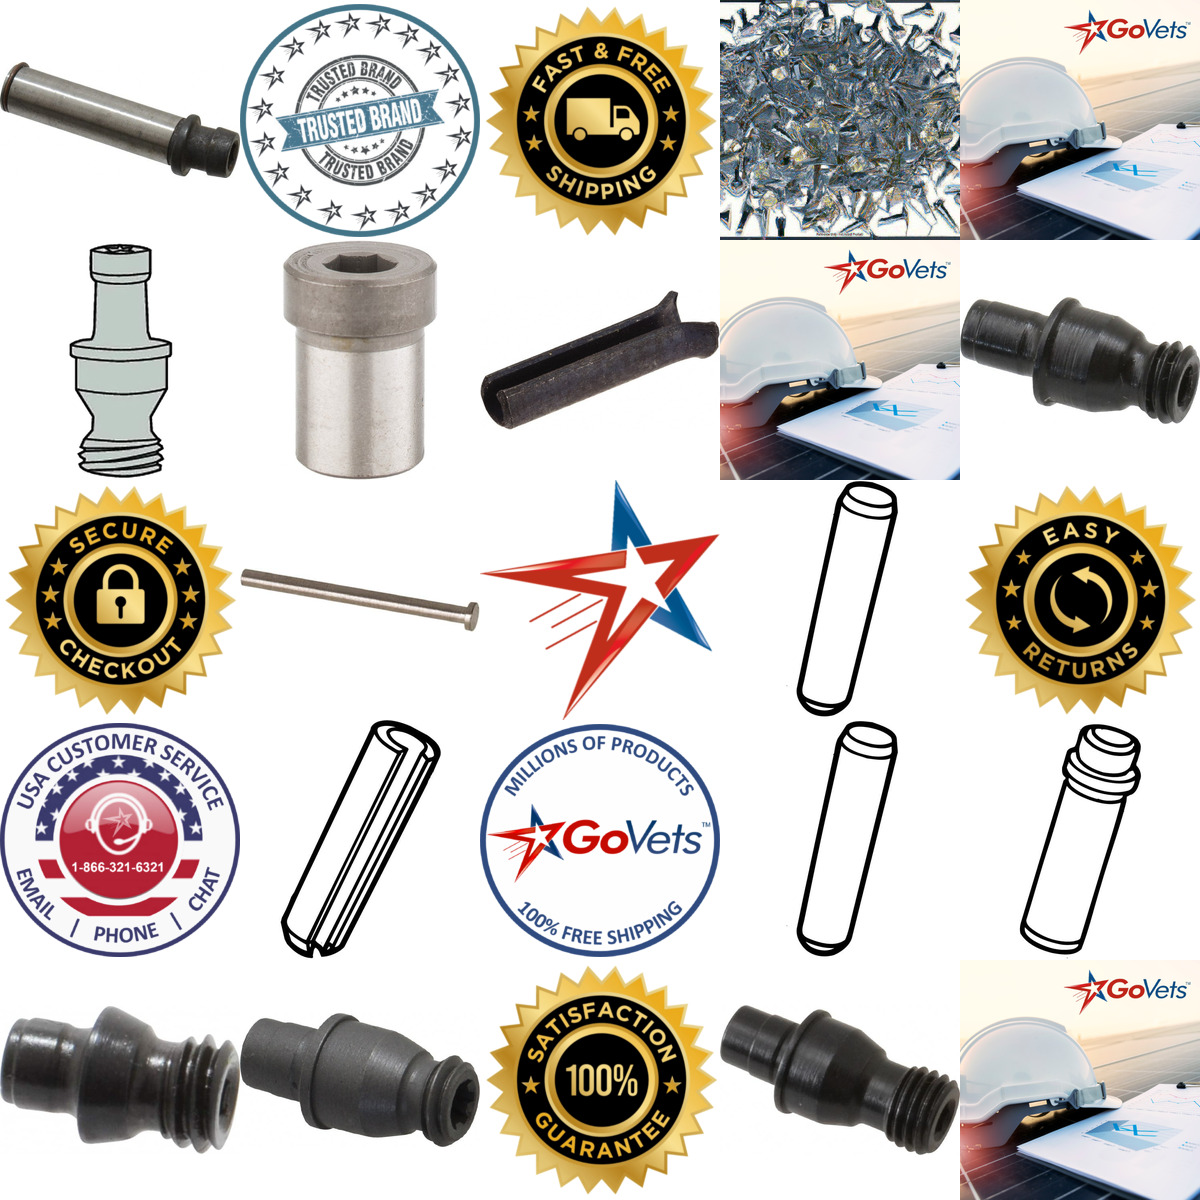 A selection of Pins For Indexables products on GoVets